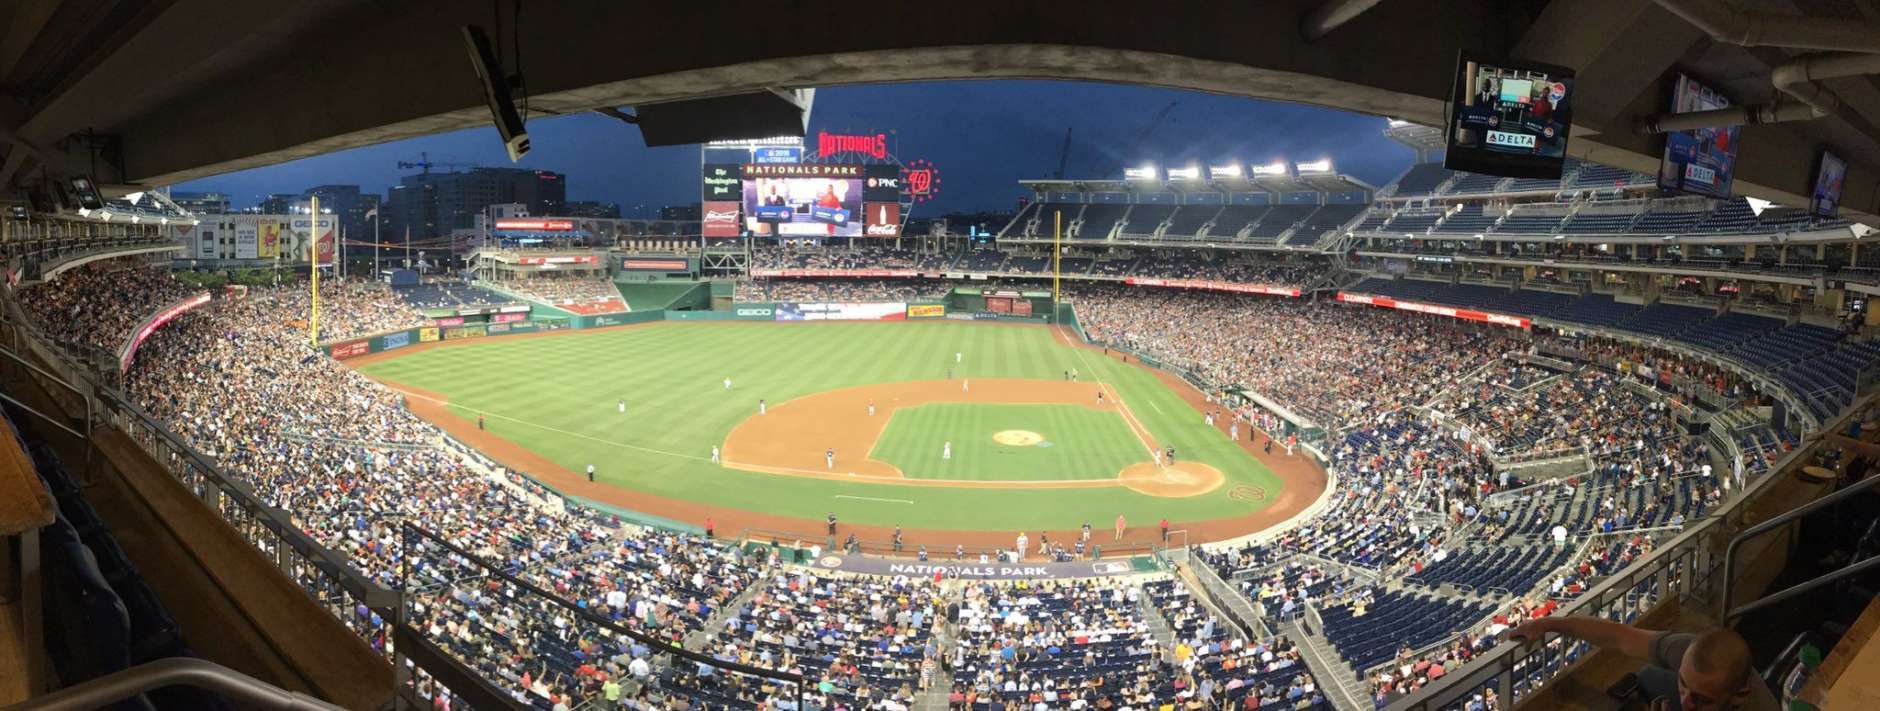 Nearly 25,000 attended Thursday's Congressional Baseball Game at Nats Park. (WTOP/George Wallace)